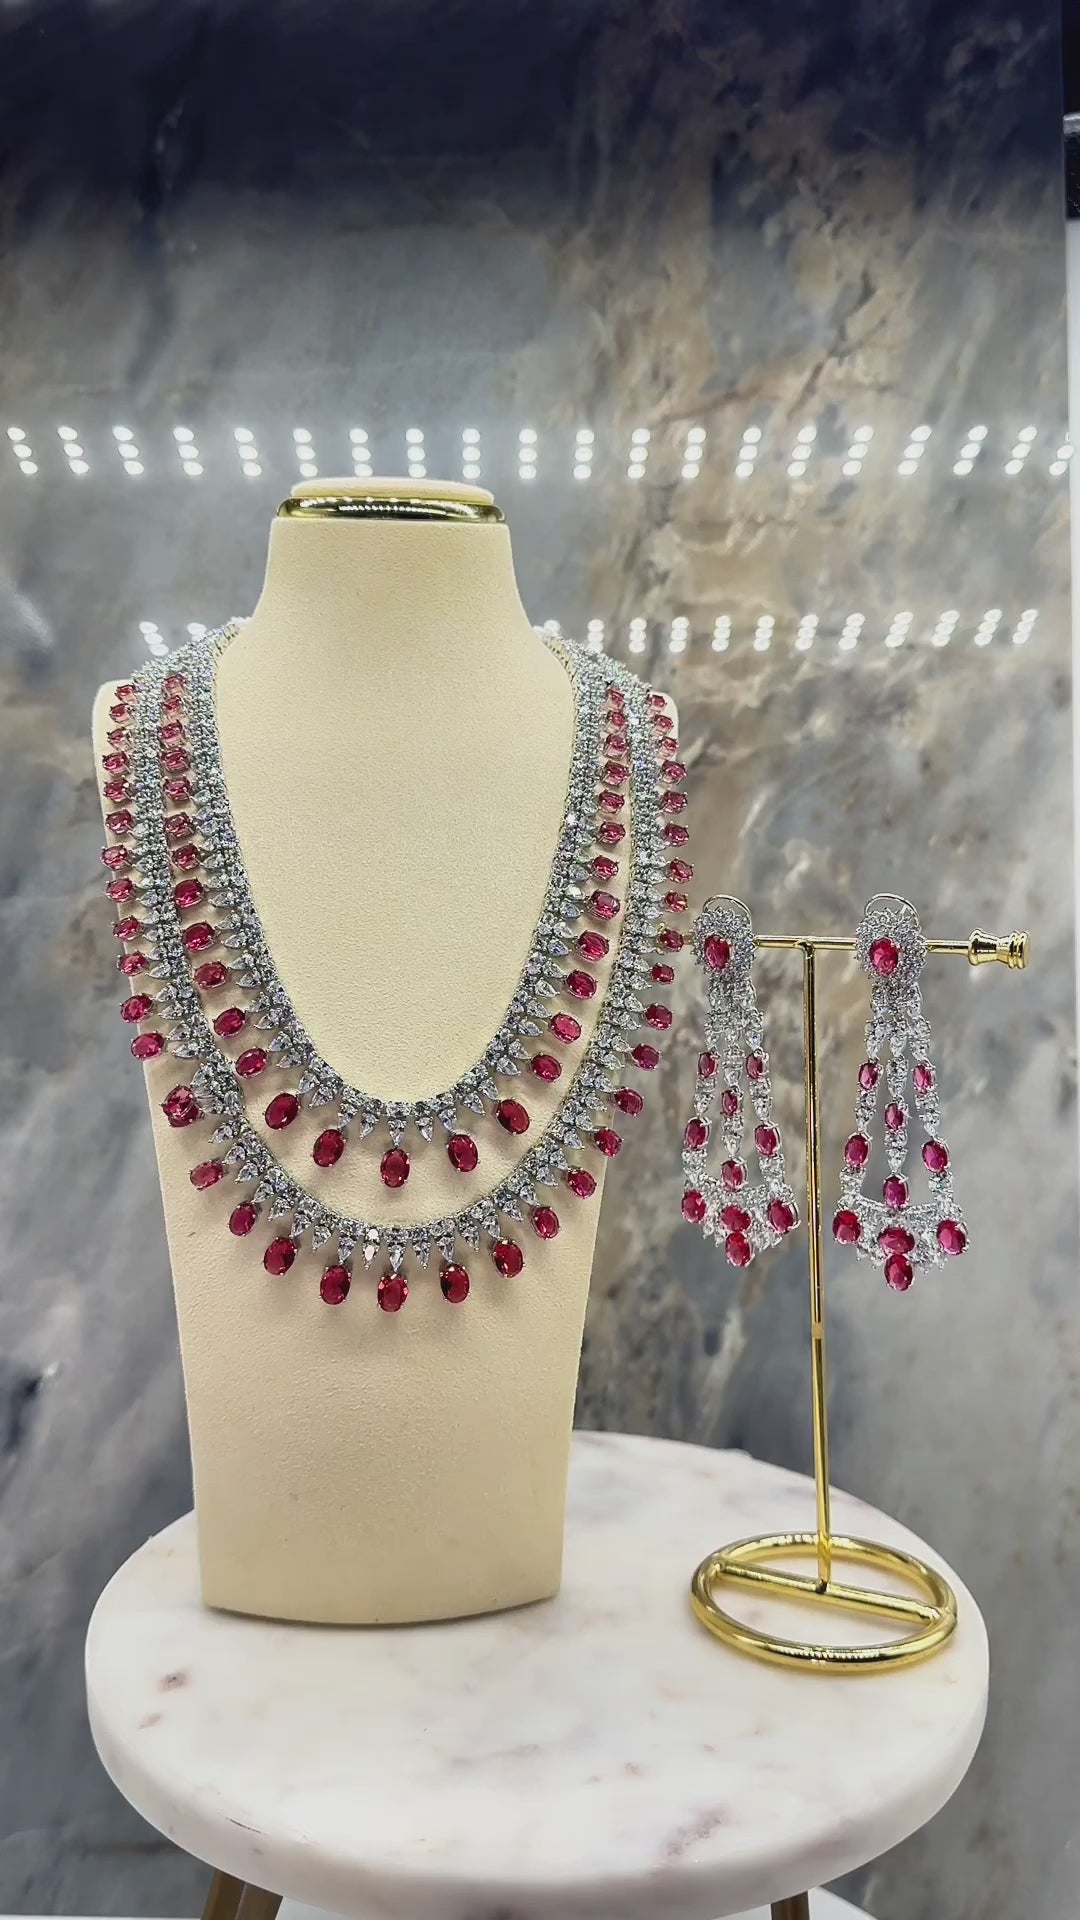 Arni Long Double Layer Diamanté AD Necklace Set - Rhodium-plated silver finish with intricate detailing, available in five colors, includes matching statement earrings.